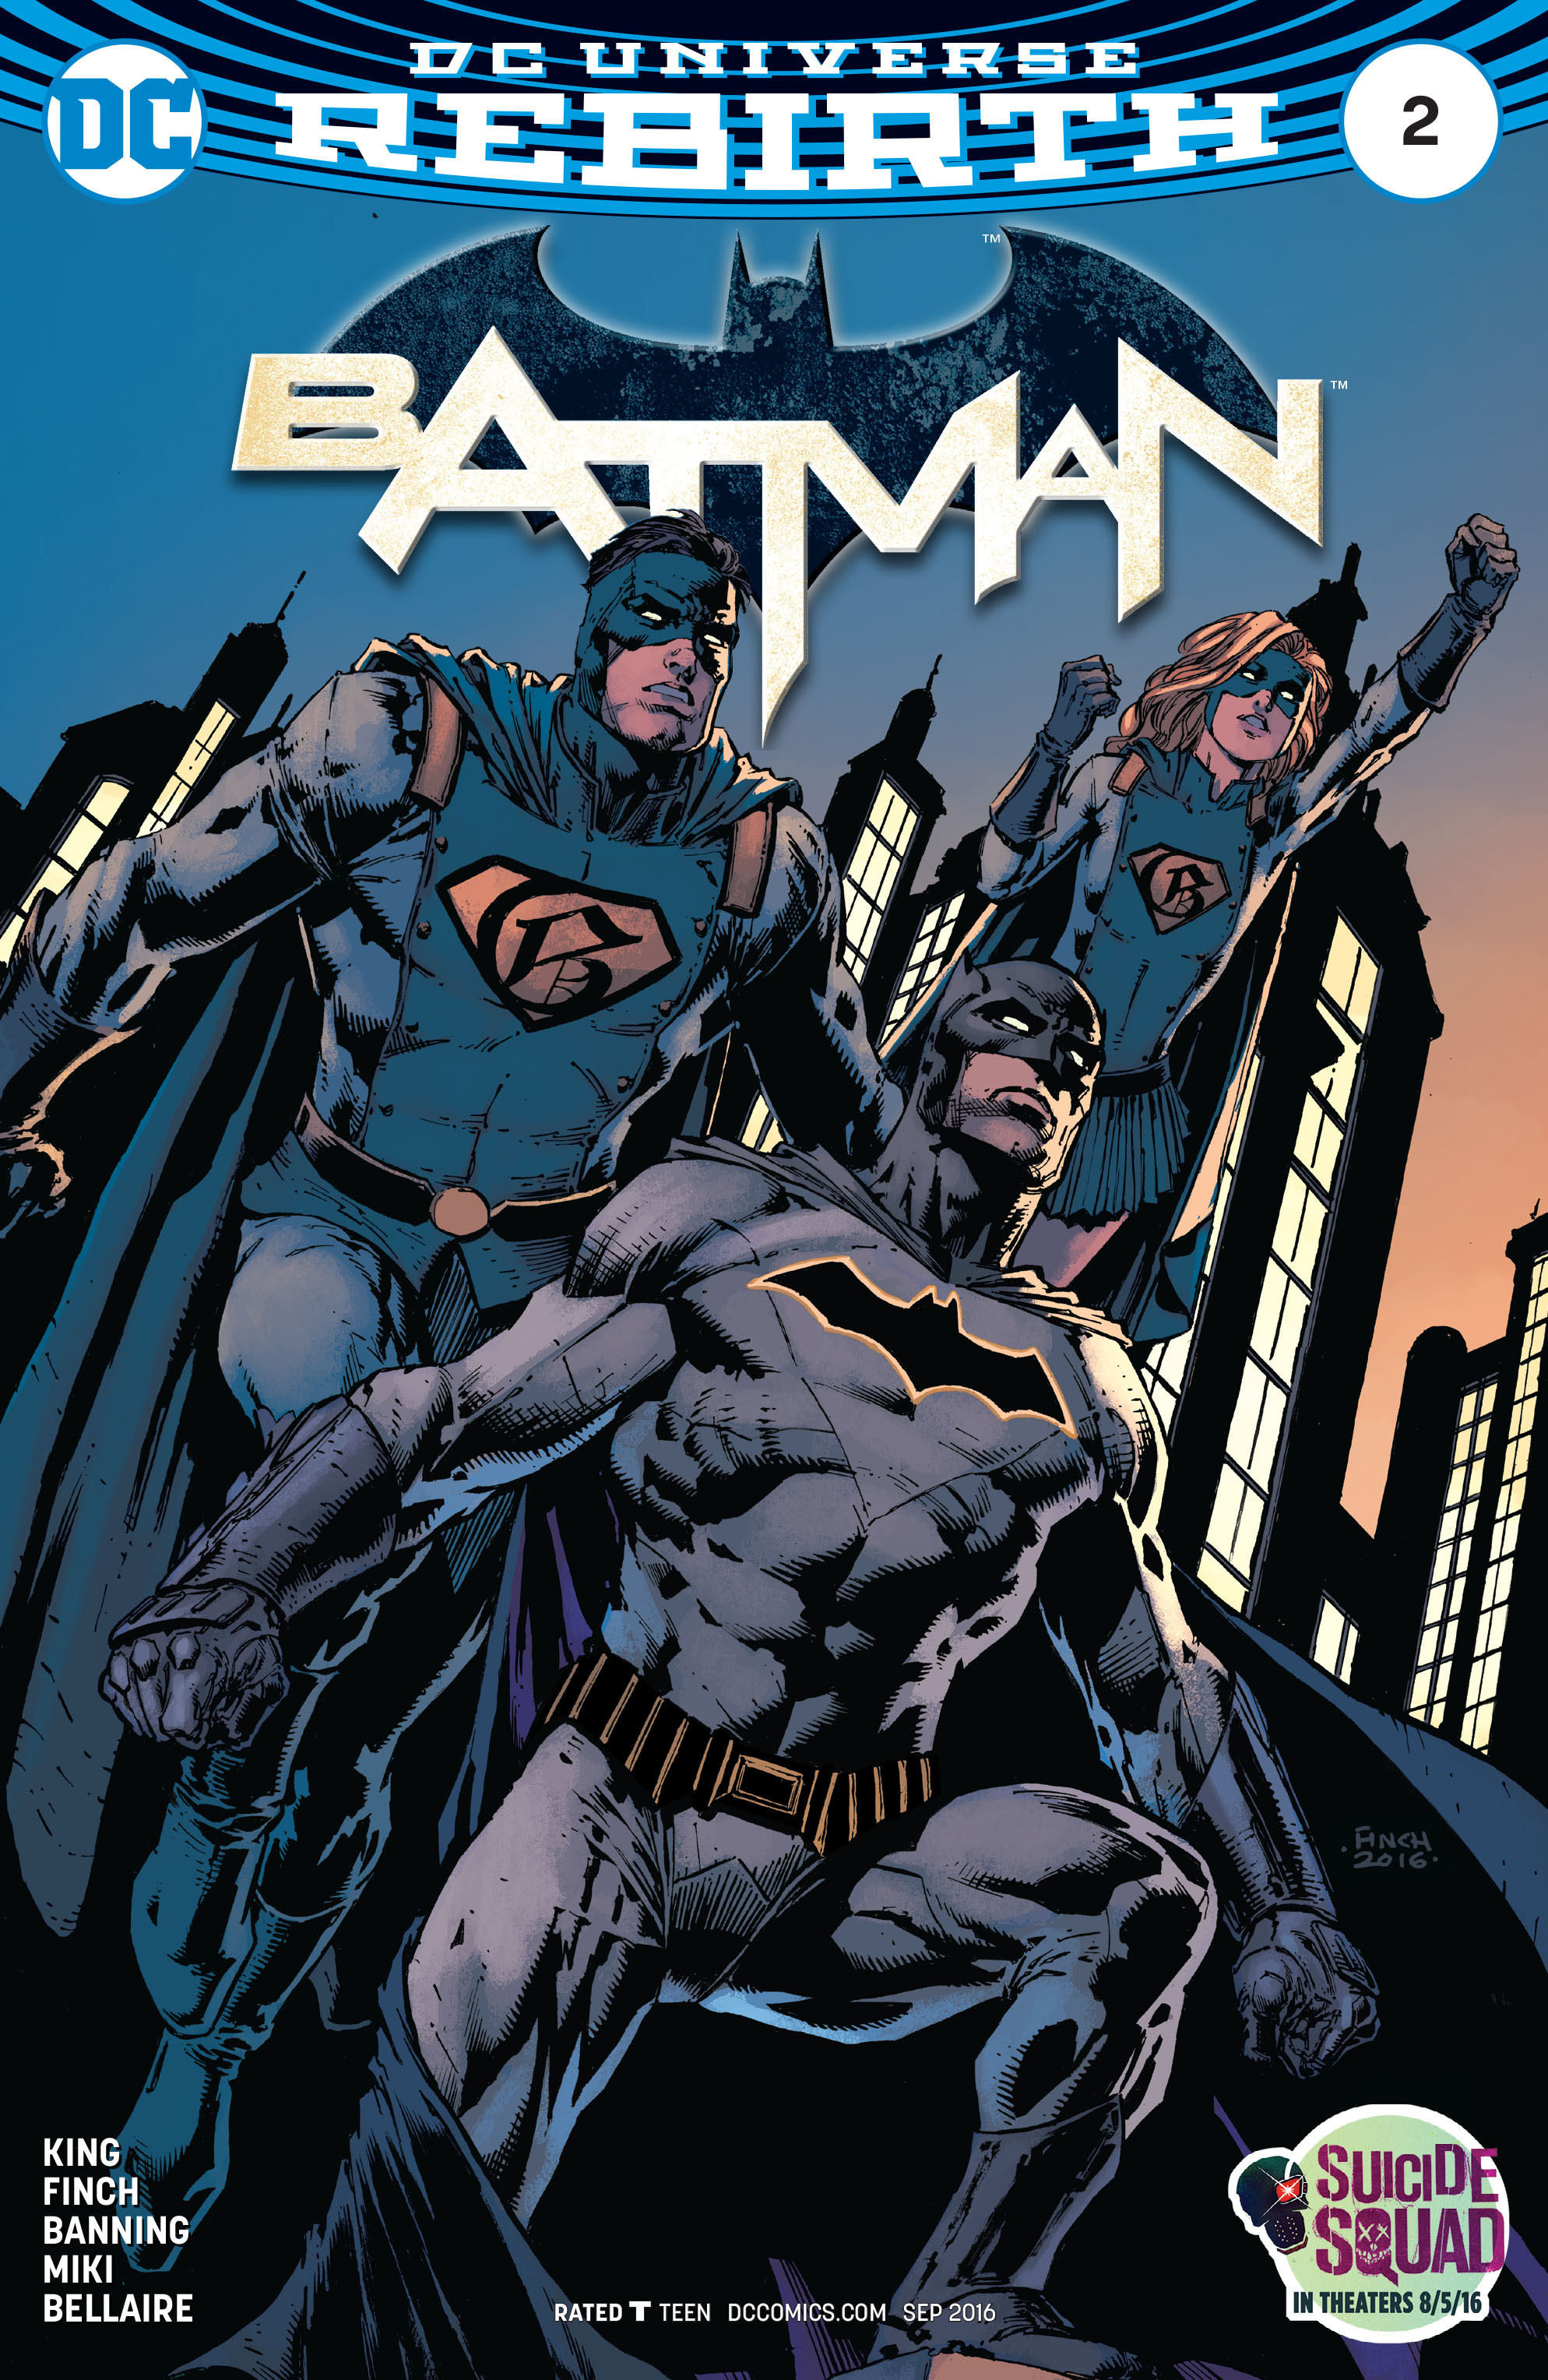 Batman 2016 Issue 2 | Read Batman 2016 Issue 2 comic online in high  quality. Read Full Comic online for free - Read comics online in high  quality .| READ COMIC ONLINE